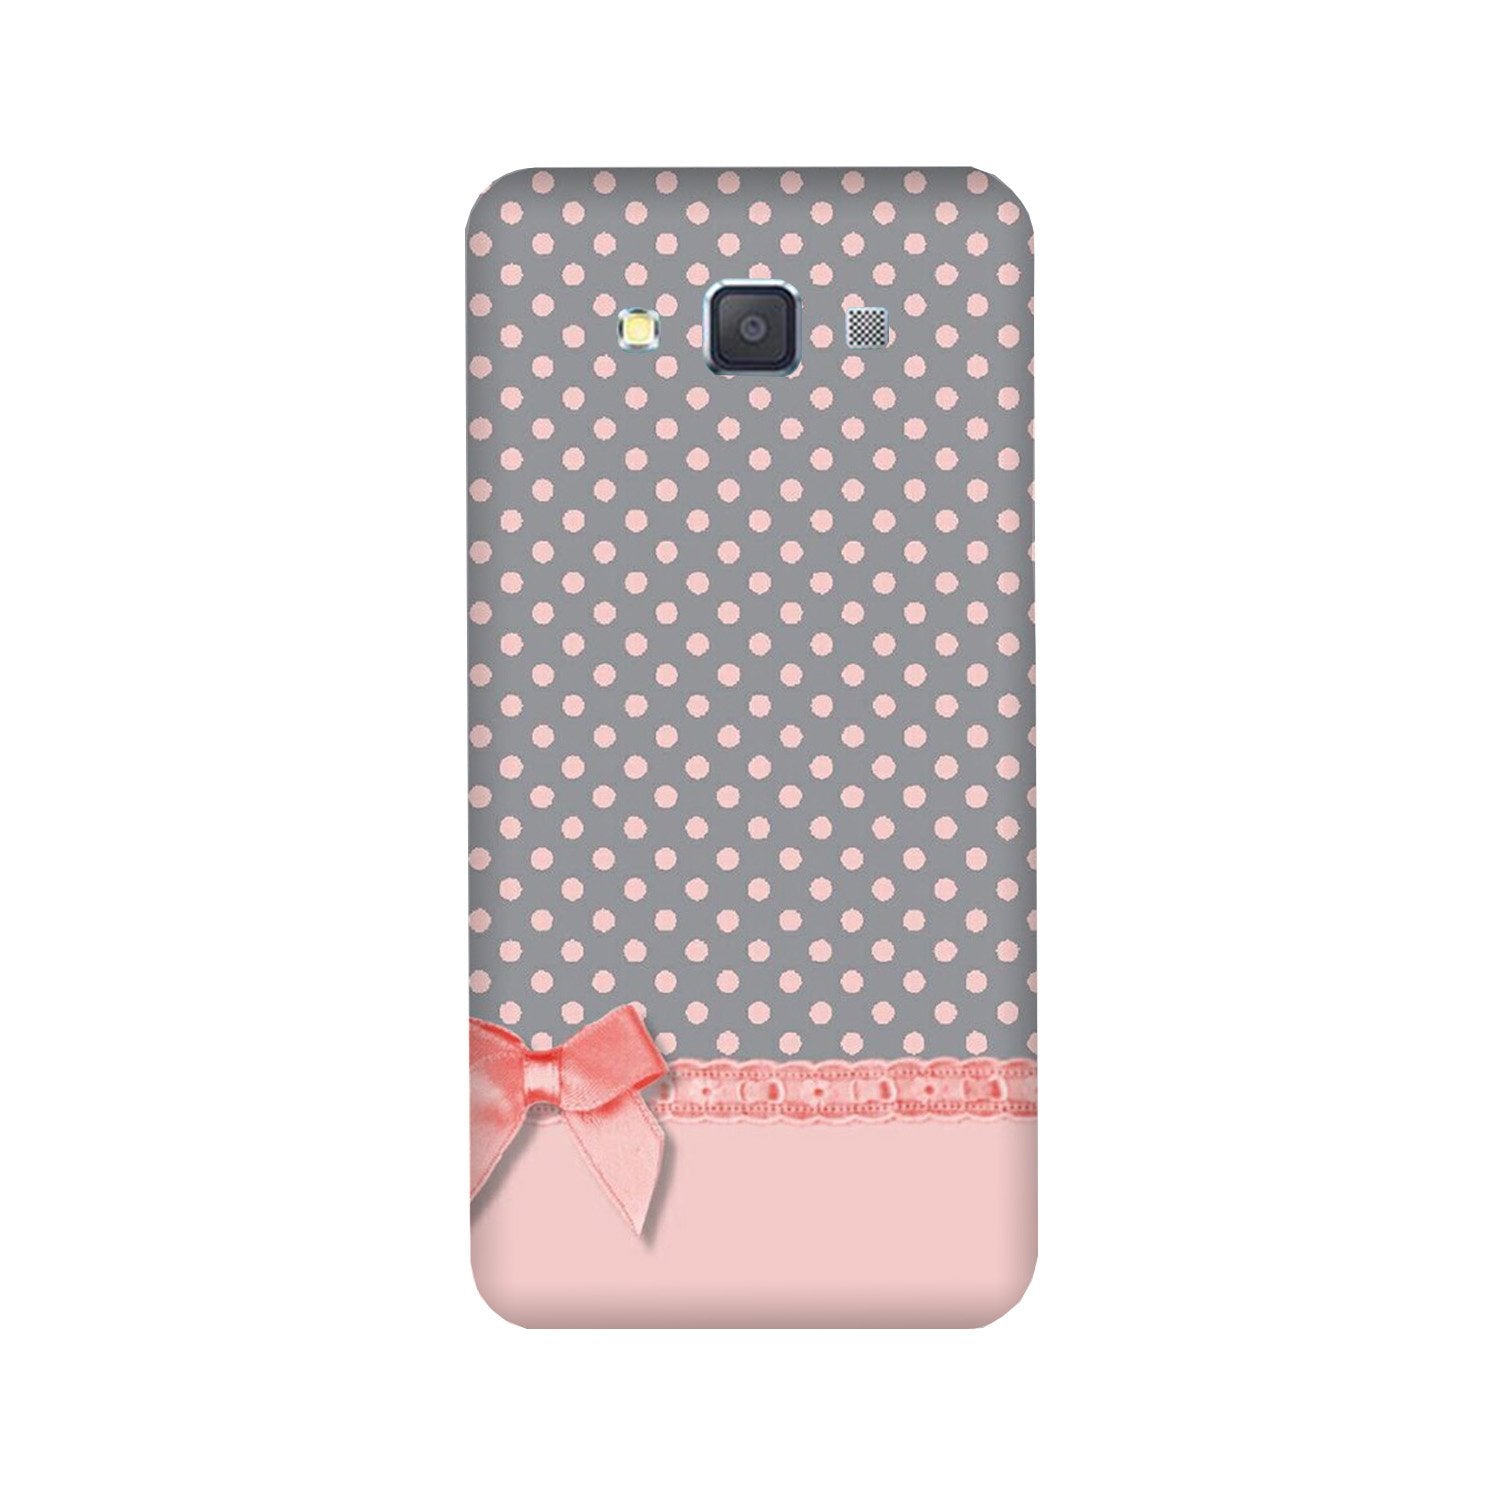 Gift Wrap2 Case for Galaxy A3 (2015)